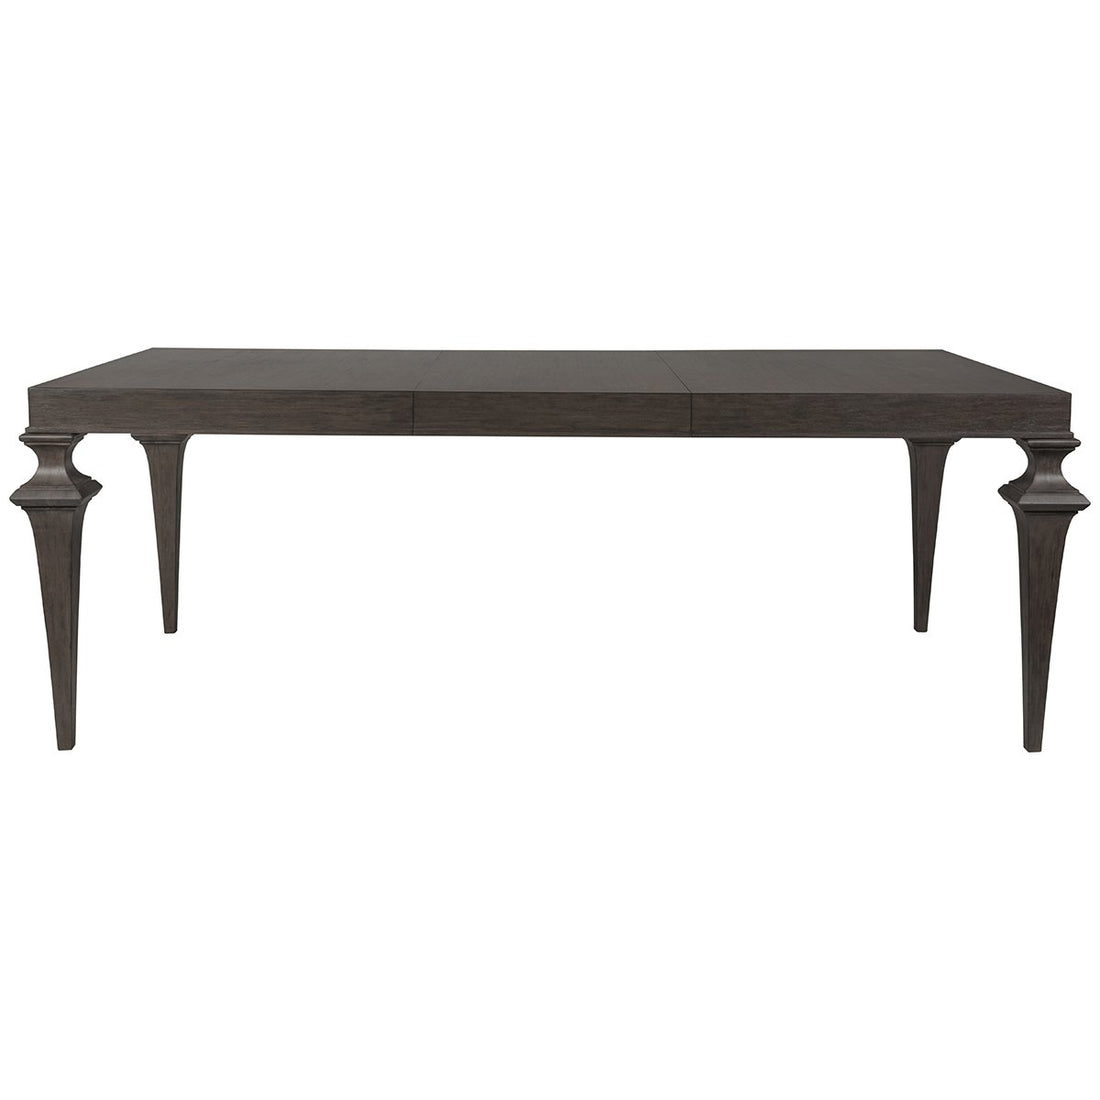 Artistica Home Brussels Rectangular Dining Table 2226-877